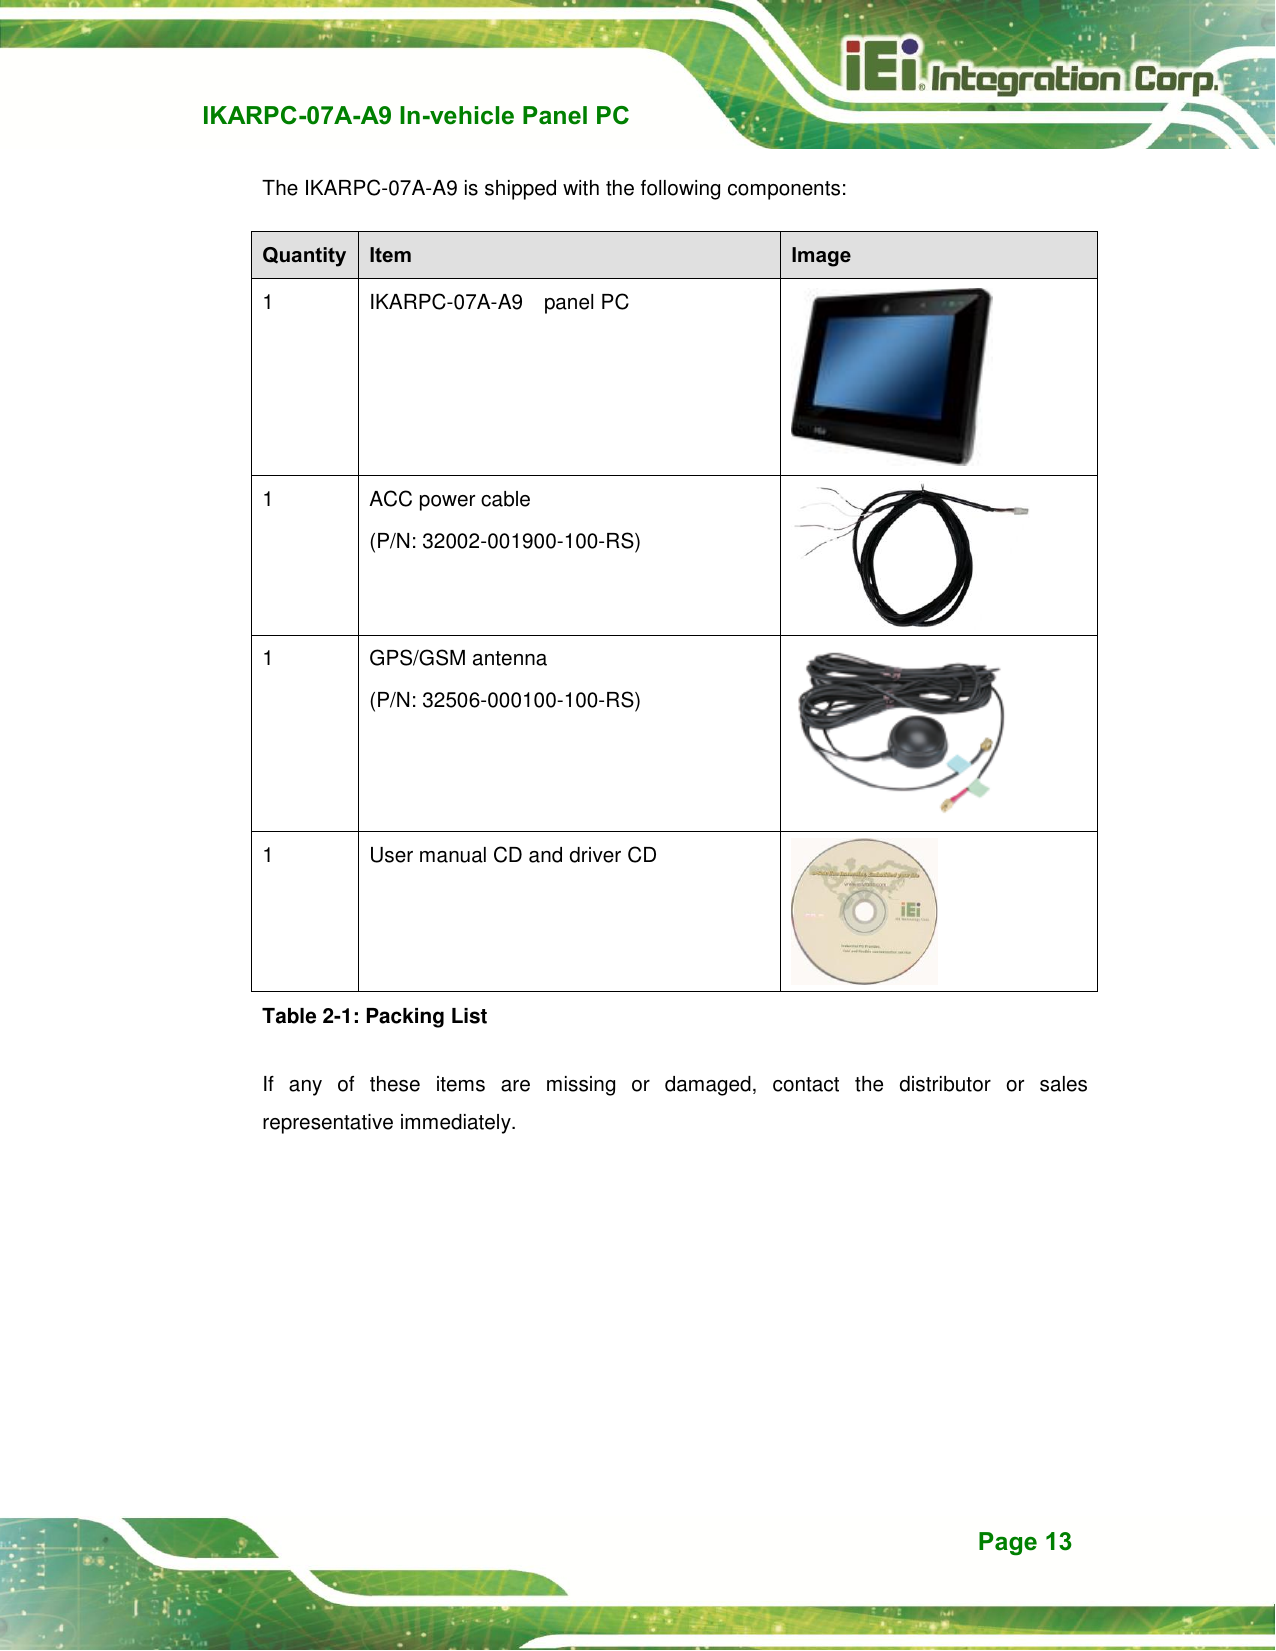   IKARPC-07A-A9 In-vehicle Panel PC  Page 13 The IKARPC-07A-A9 is shipped with the following components: Quantity Item Image 1 IKARPC-07A-A9  panel PC  1 ACC power cable (P/N: 32002-001900-100-RS)  1 GPS/GSM antenna (P/N: 32506-000100-100-RS)  1 User manual CD and driver CD  Table 2-1: Packing List If  any  of  these  items  are  missing  or  damaged,  contact  the  distributor  or  sales representative immediately. 